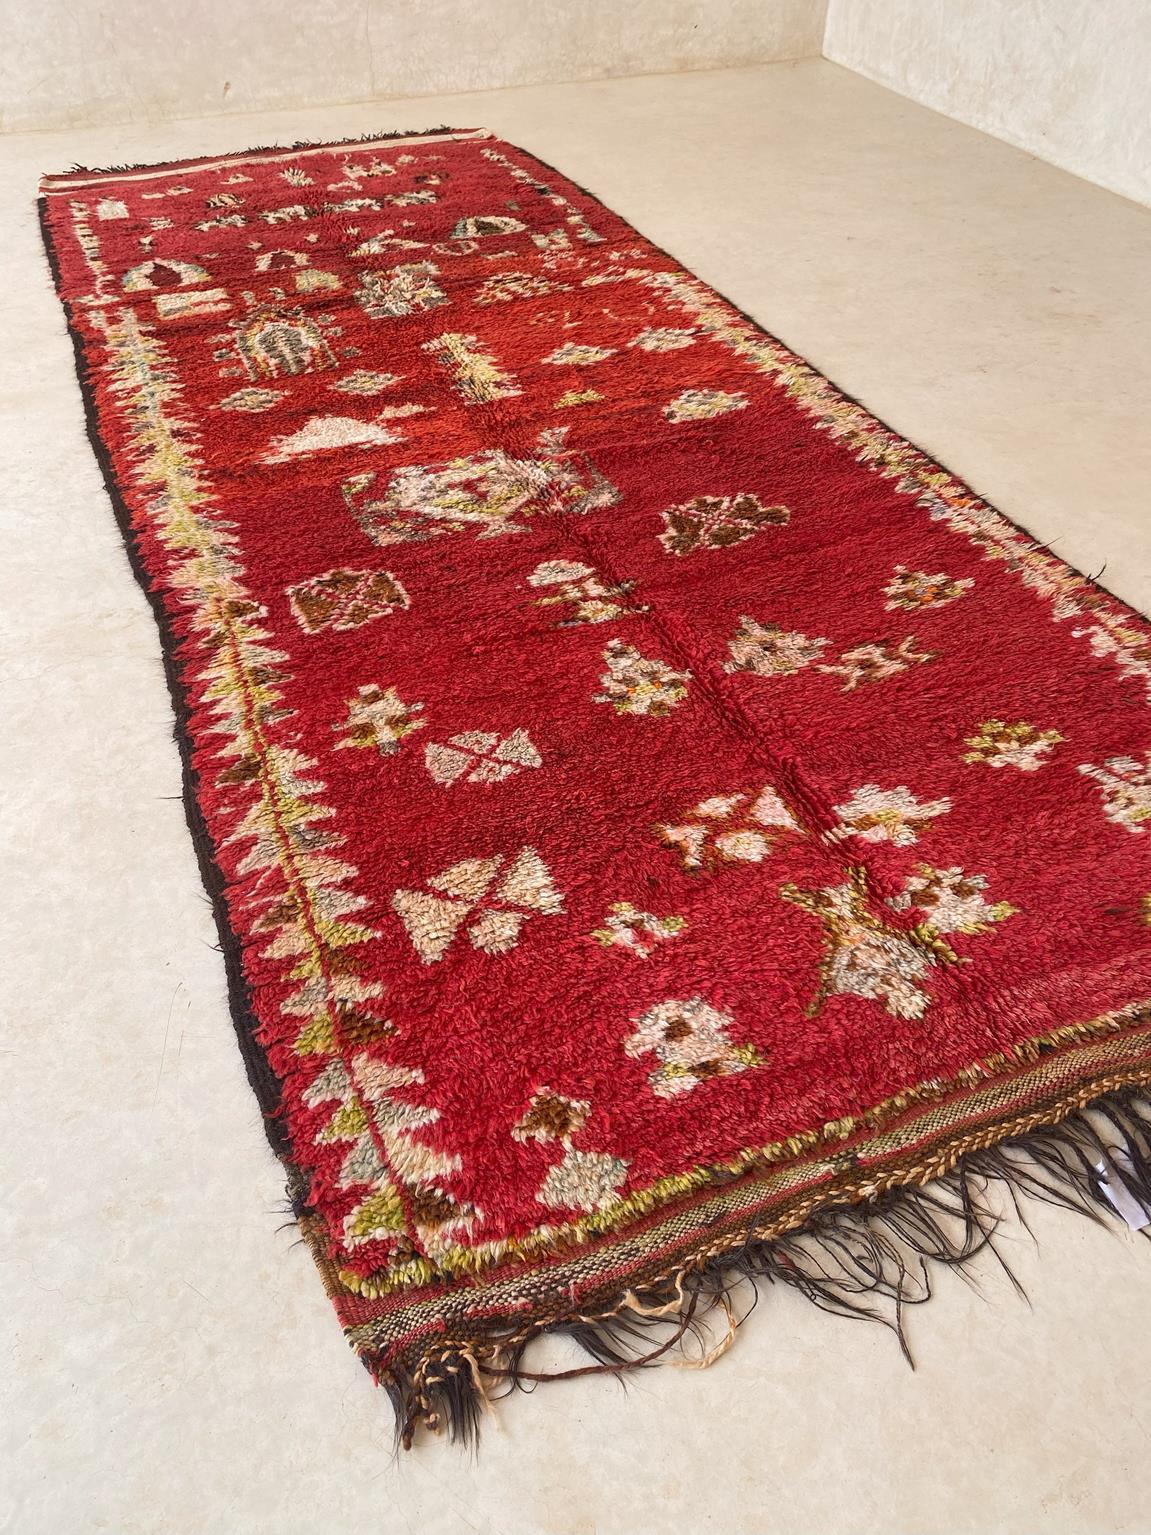 Tribal Vintage Moroccan Rehamna rug - Red - 5.1x12.5feet / 156x382cm For Sale